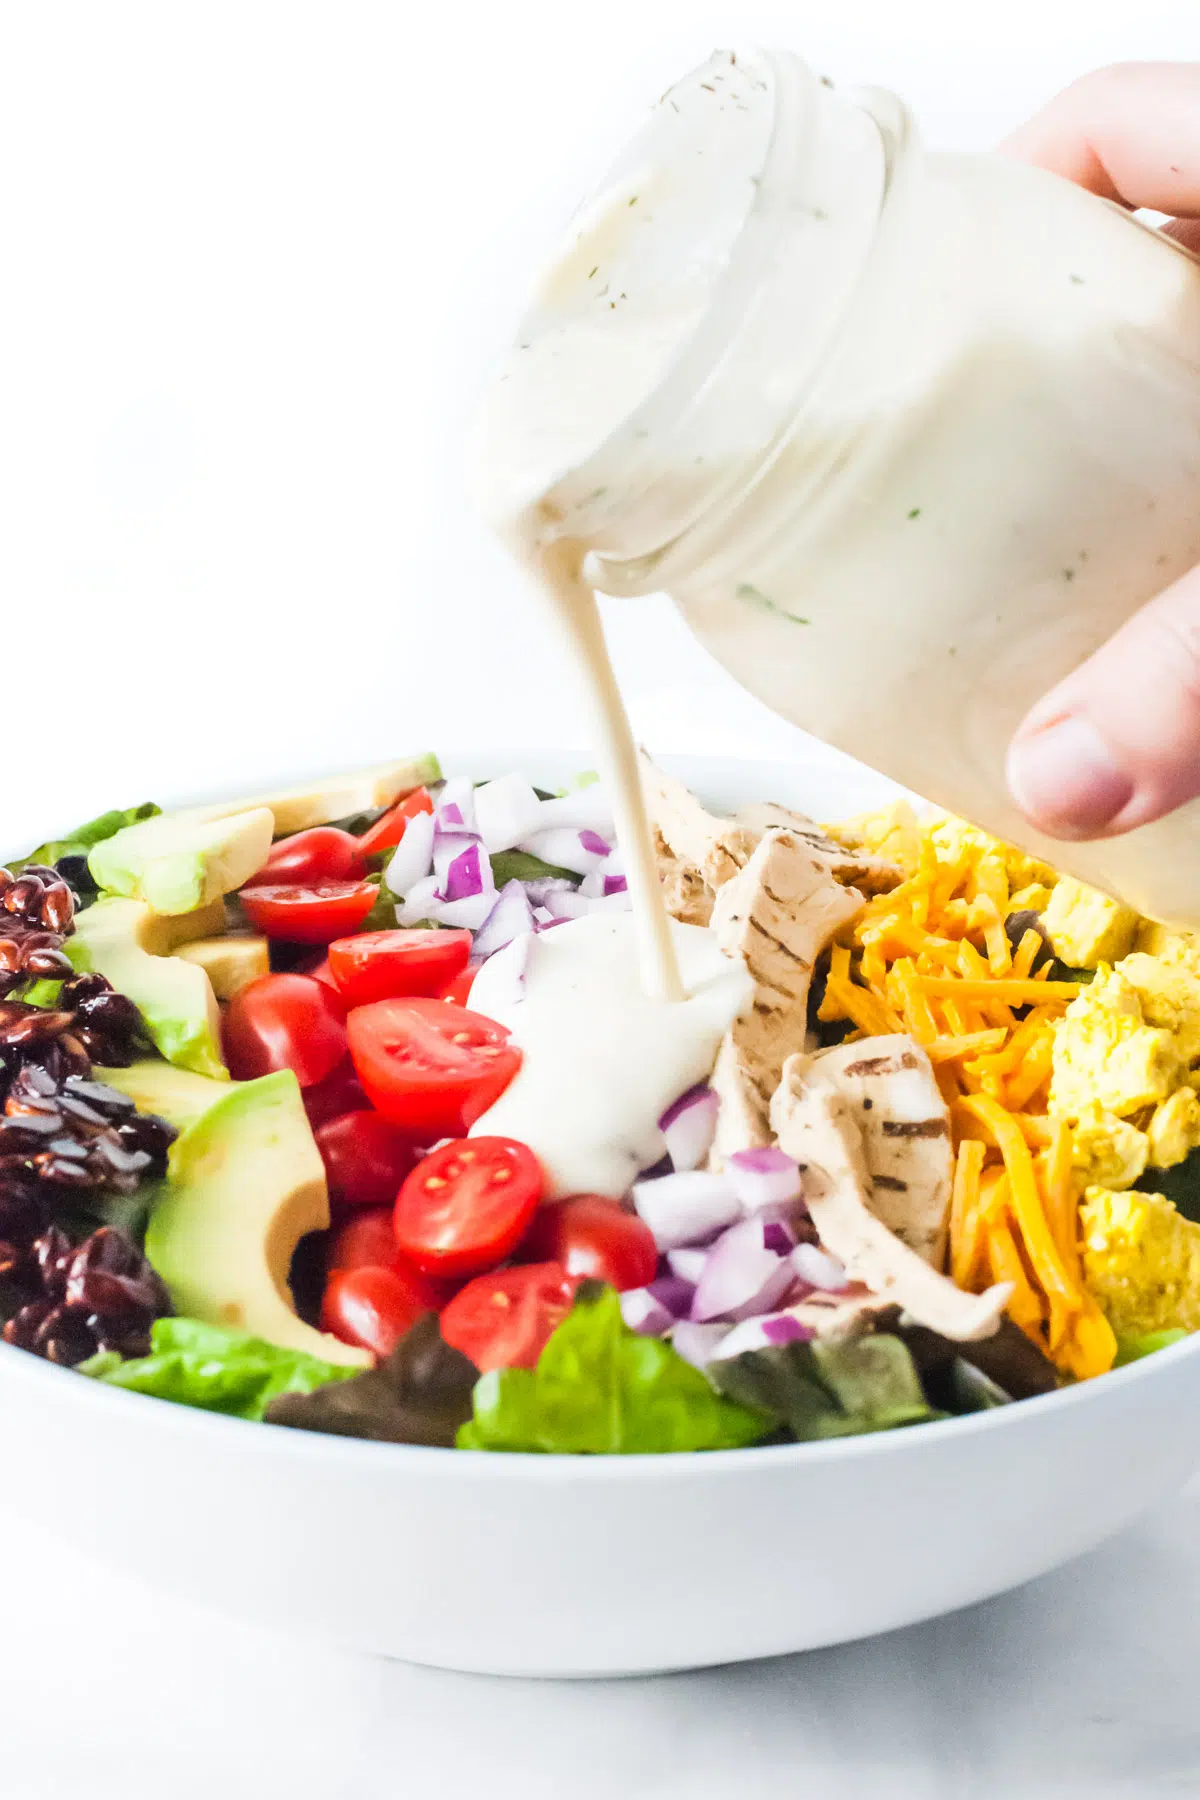 A jar of vegan ranch dressing is being poured over a cobb salad. The white bowl is full of field greens and topped with smoky almond slivers, avocado slices, sliced cherry tomatoes, red onions, vegan chicken, vegan cheddar cheese, and tofu scramble.